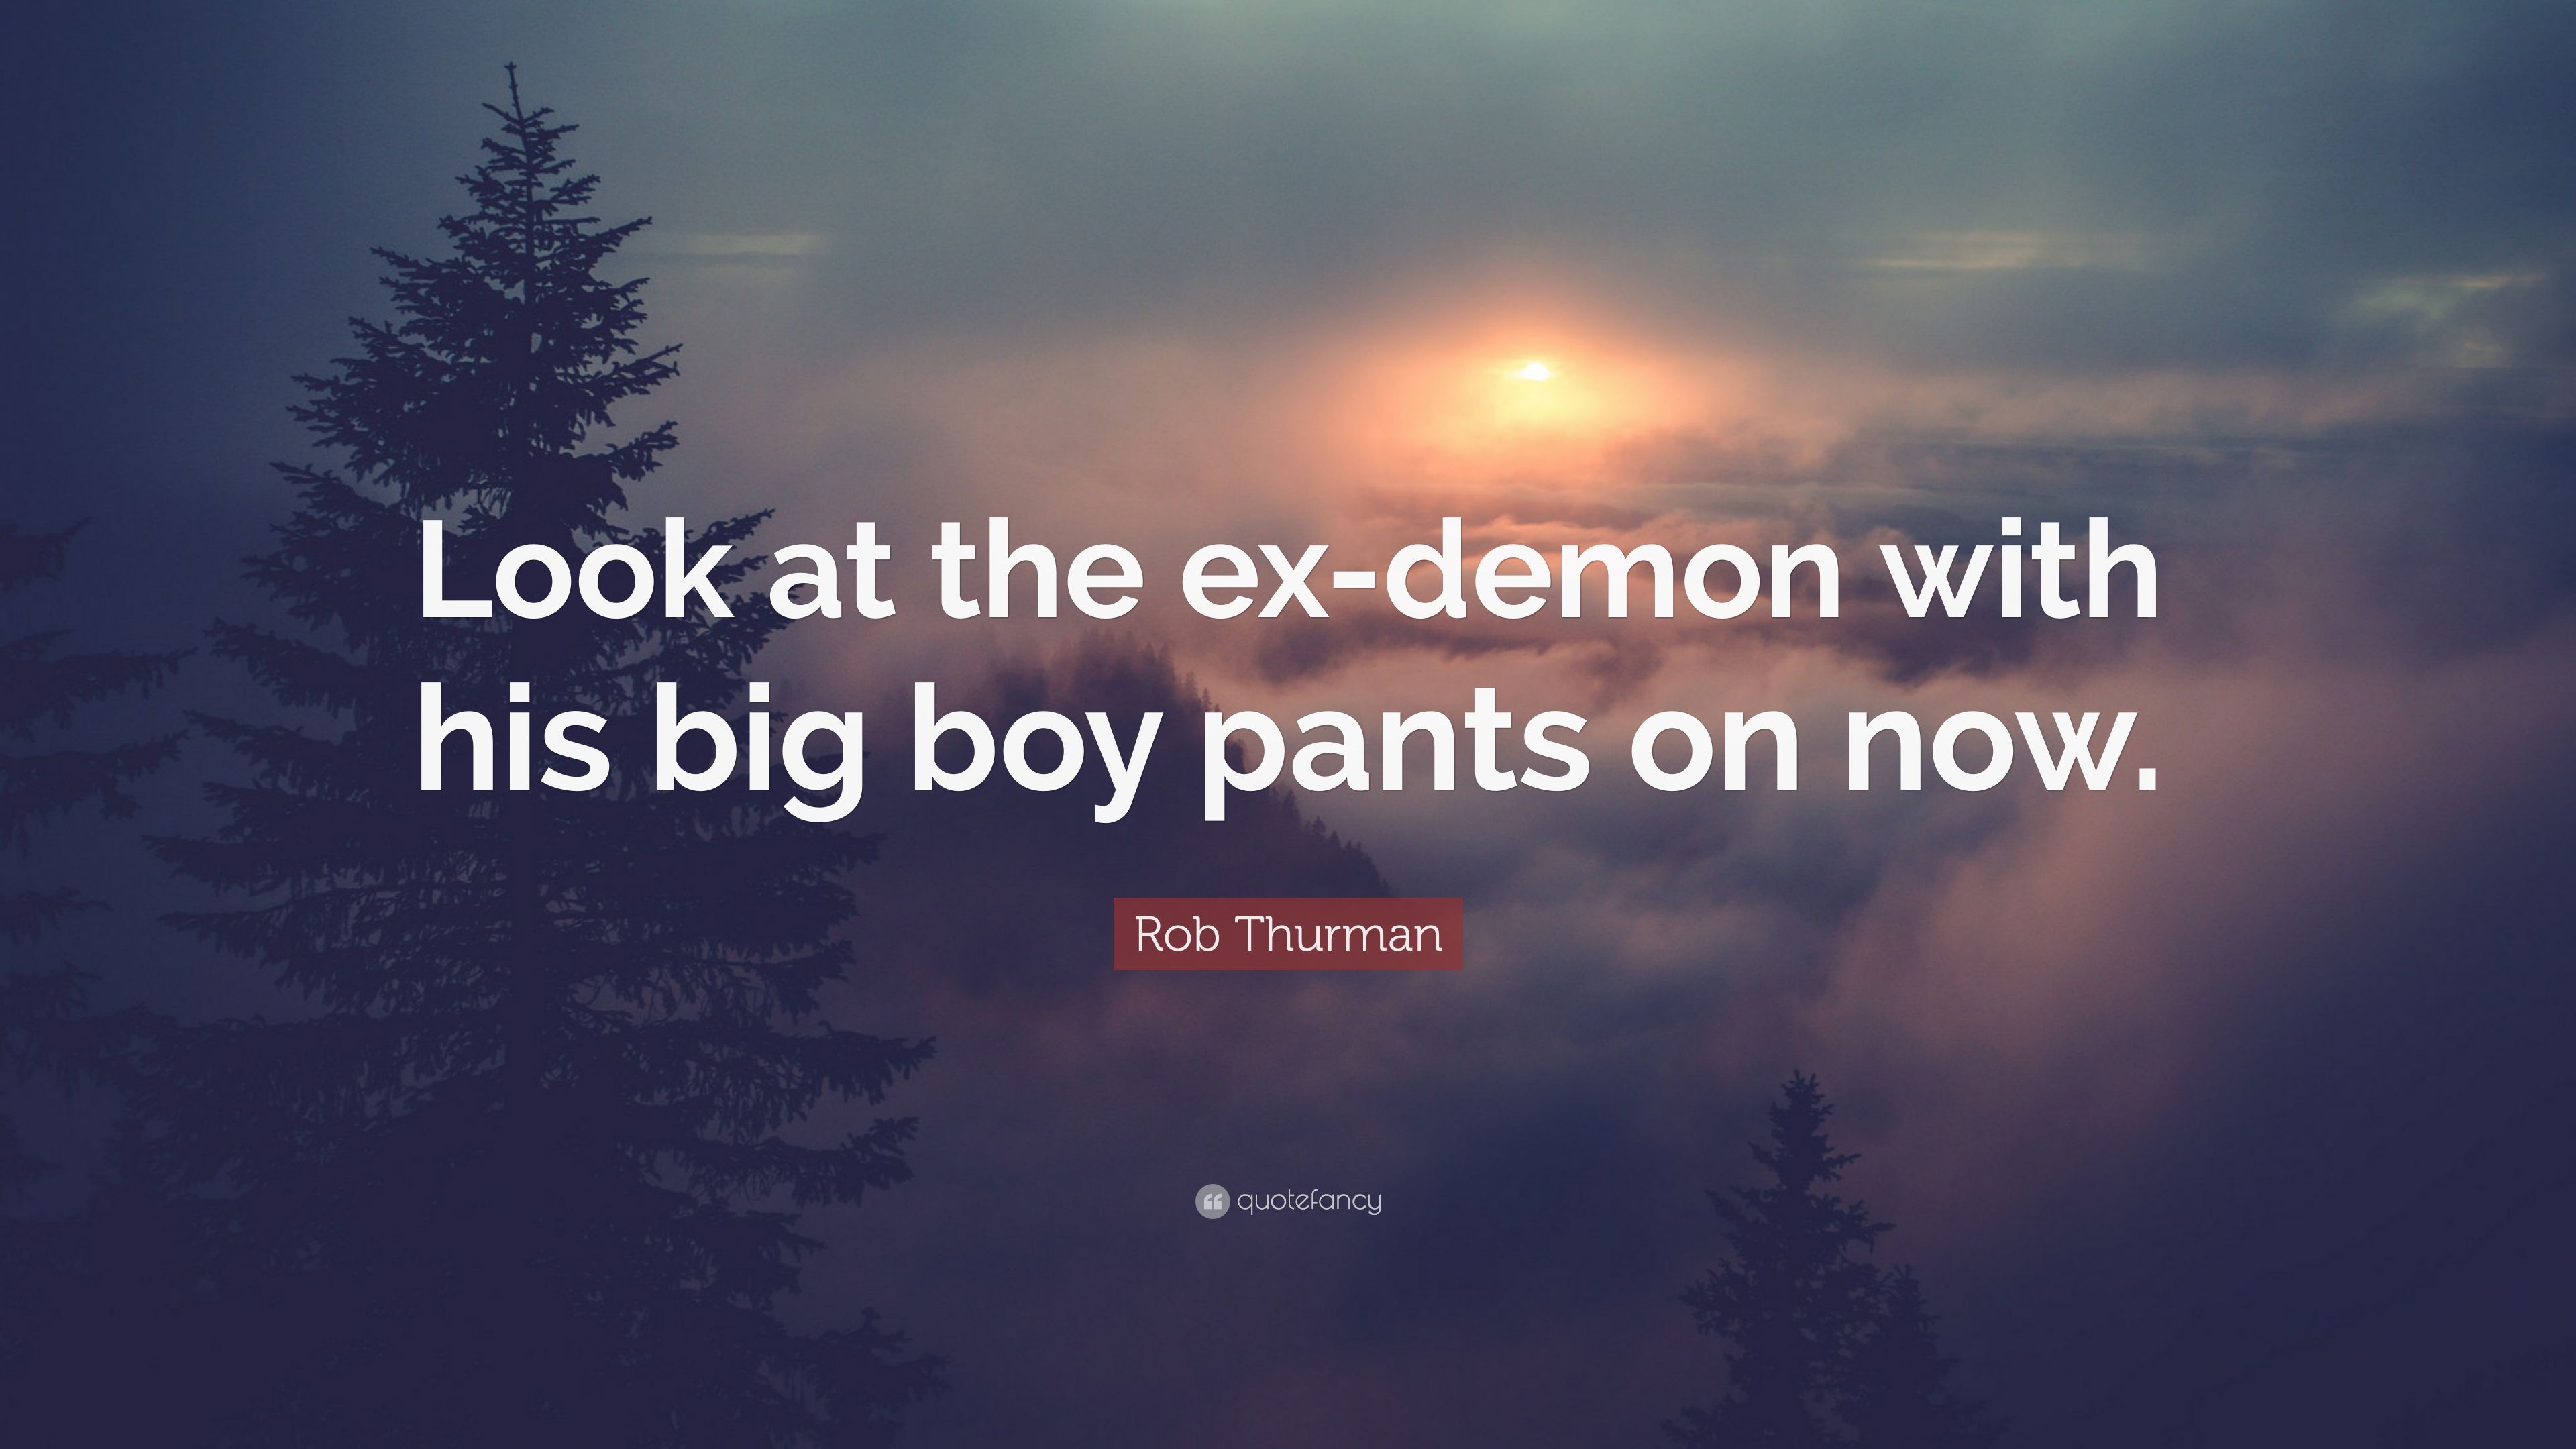 Rob Thurman Quote: “Look At The Ex Demon With His Big Boy Pants